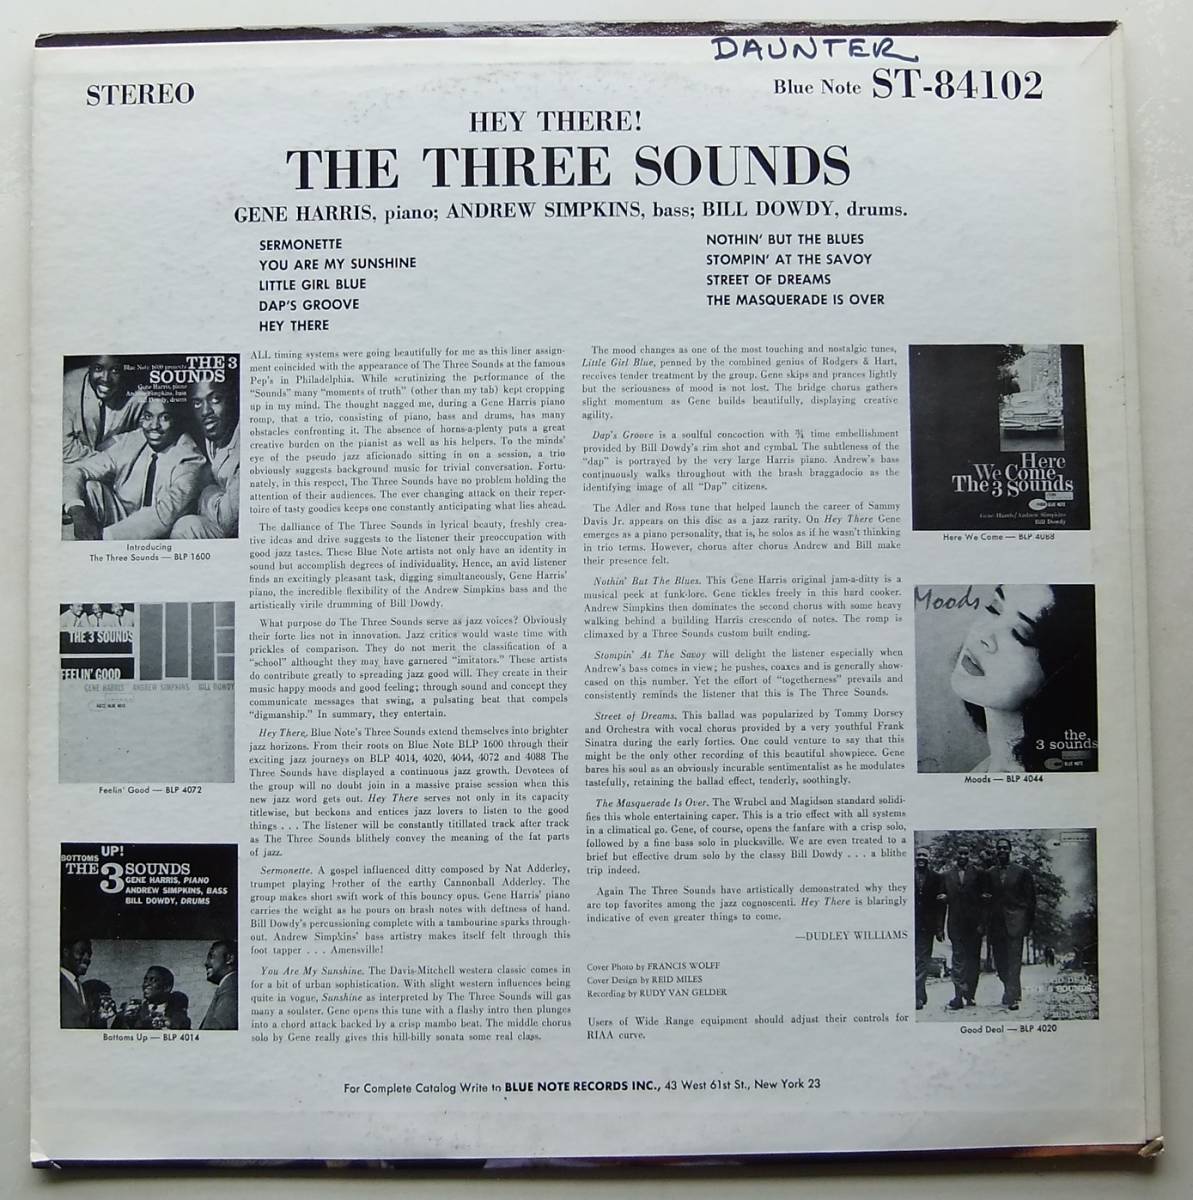 ◆ THE 3 SOUNDS / Hey There ◆ Blue Note ST-84102 (NY:VAN GELDER) ◆ V_画像2